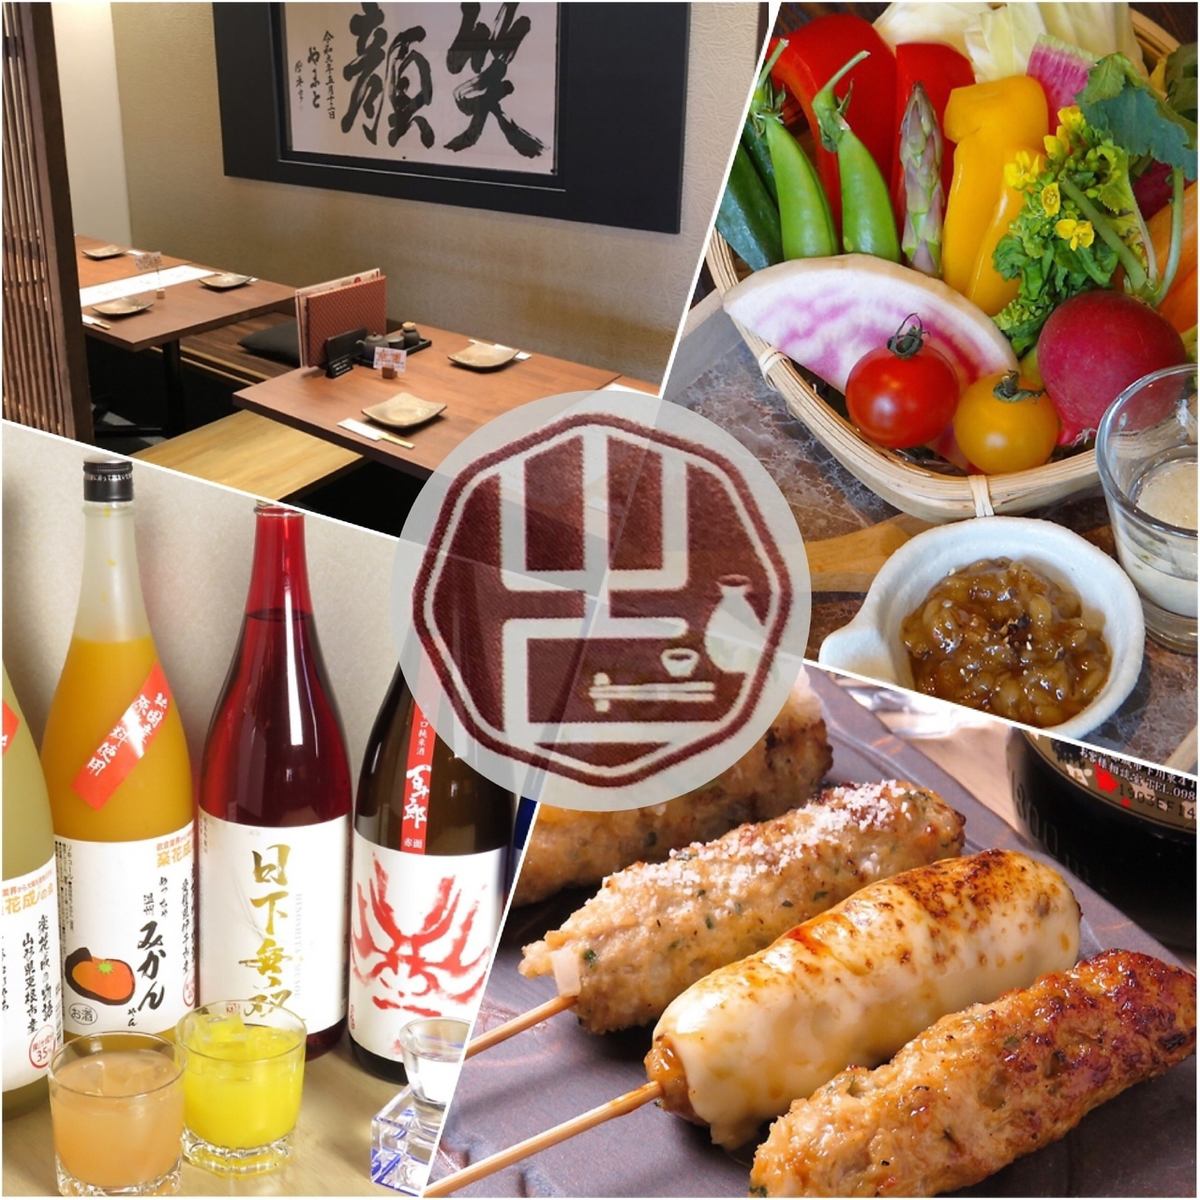 It is recommended for families with fully equipped kids' room ♪ delicious chicken dishes using chiran-do ♪